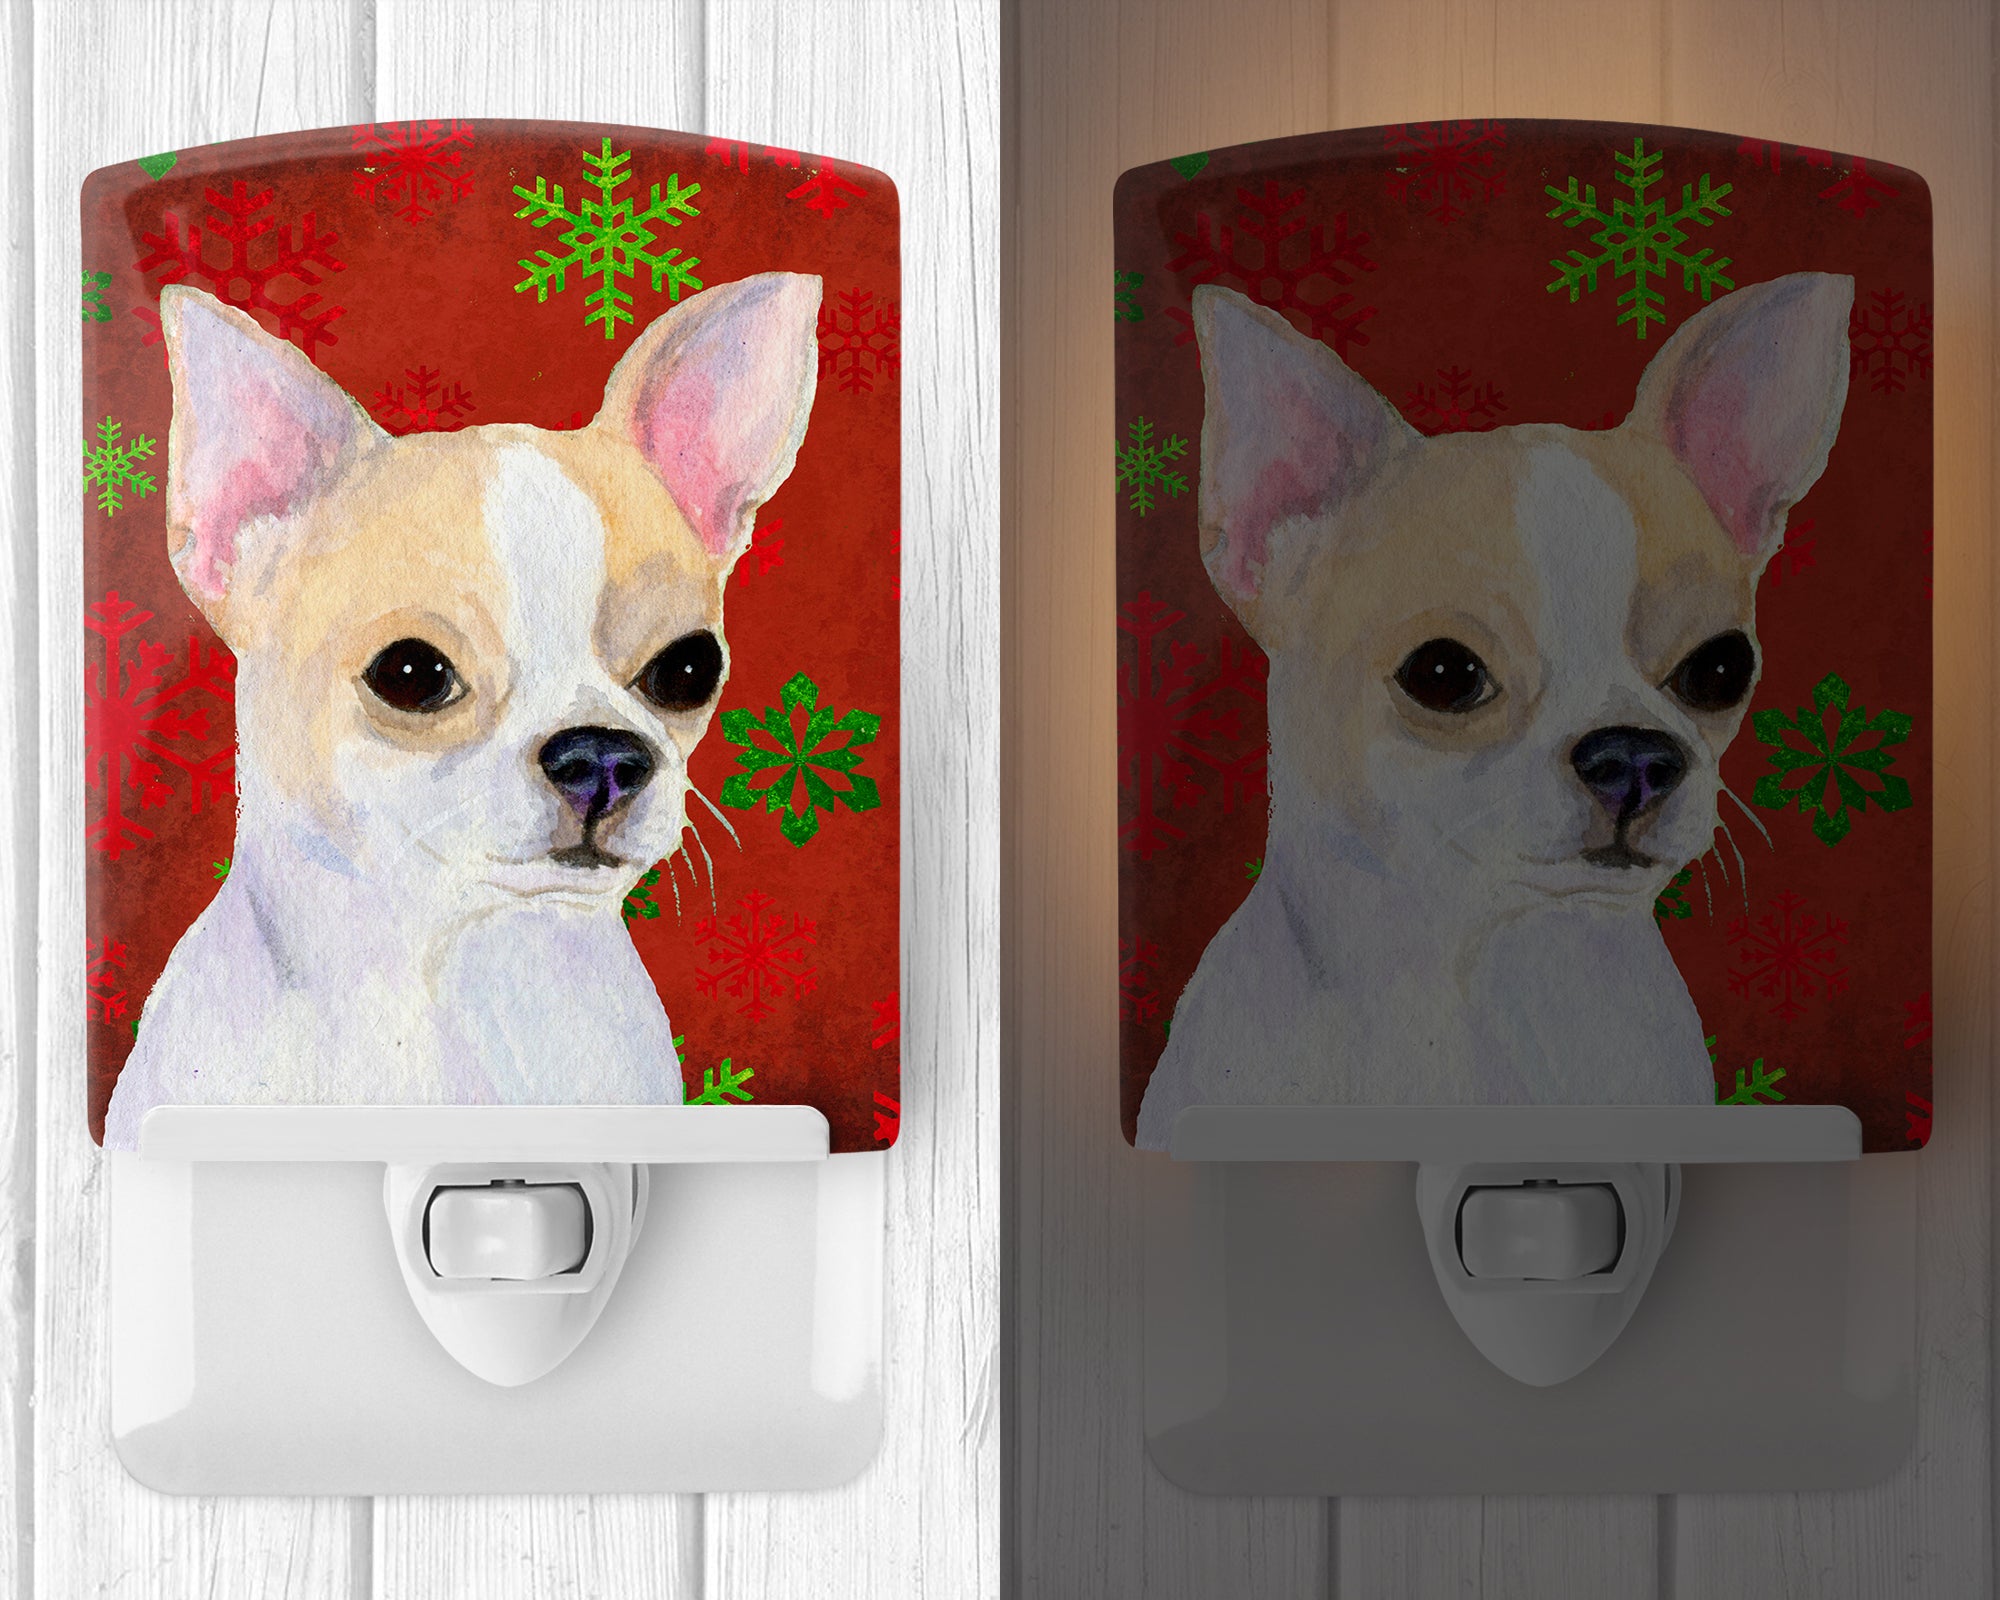 Chihuahua Red and Green Snowflakes Holiday Christmas Ceramic Night Light SS4681CNL - the-store.com